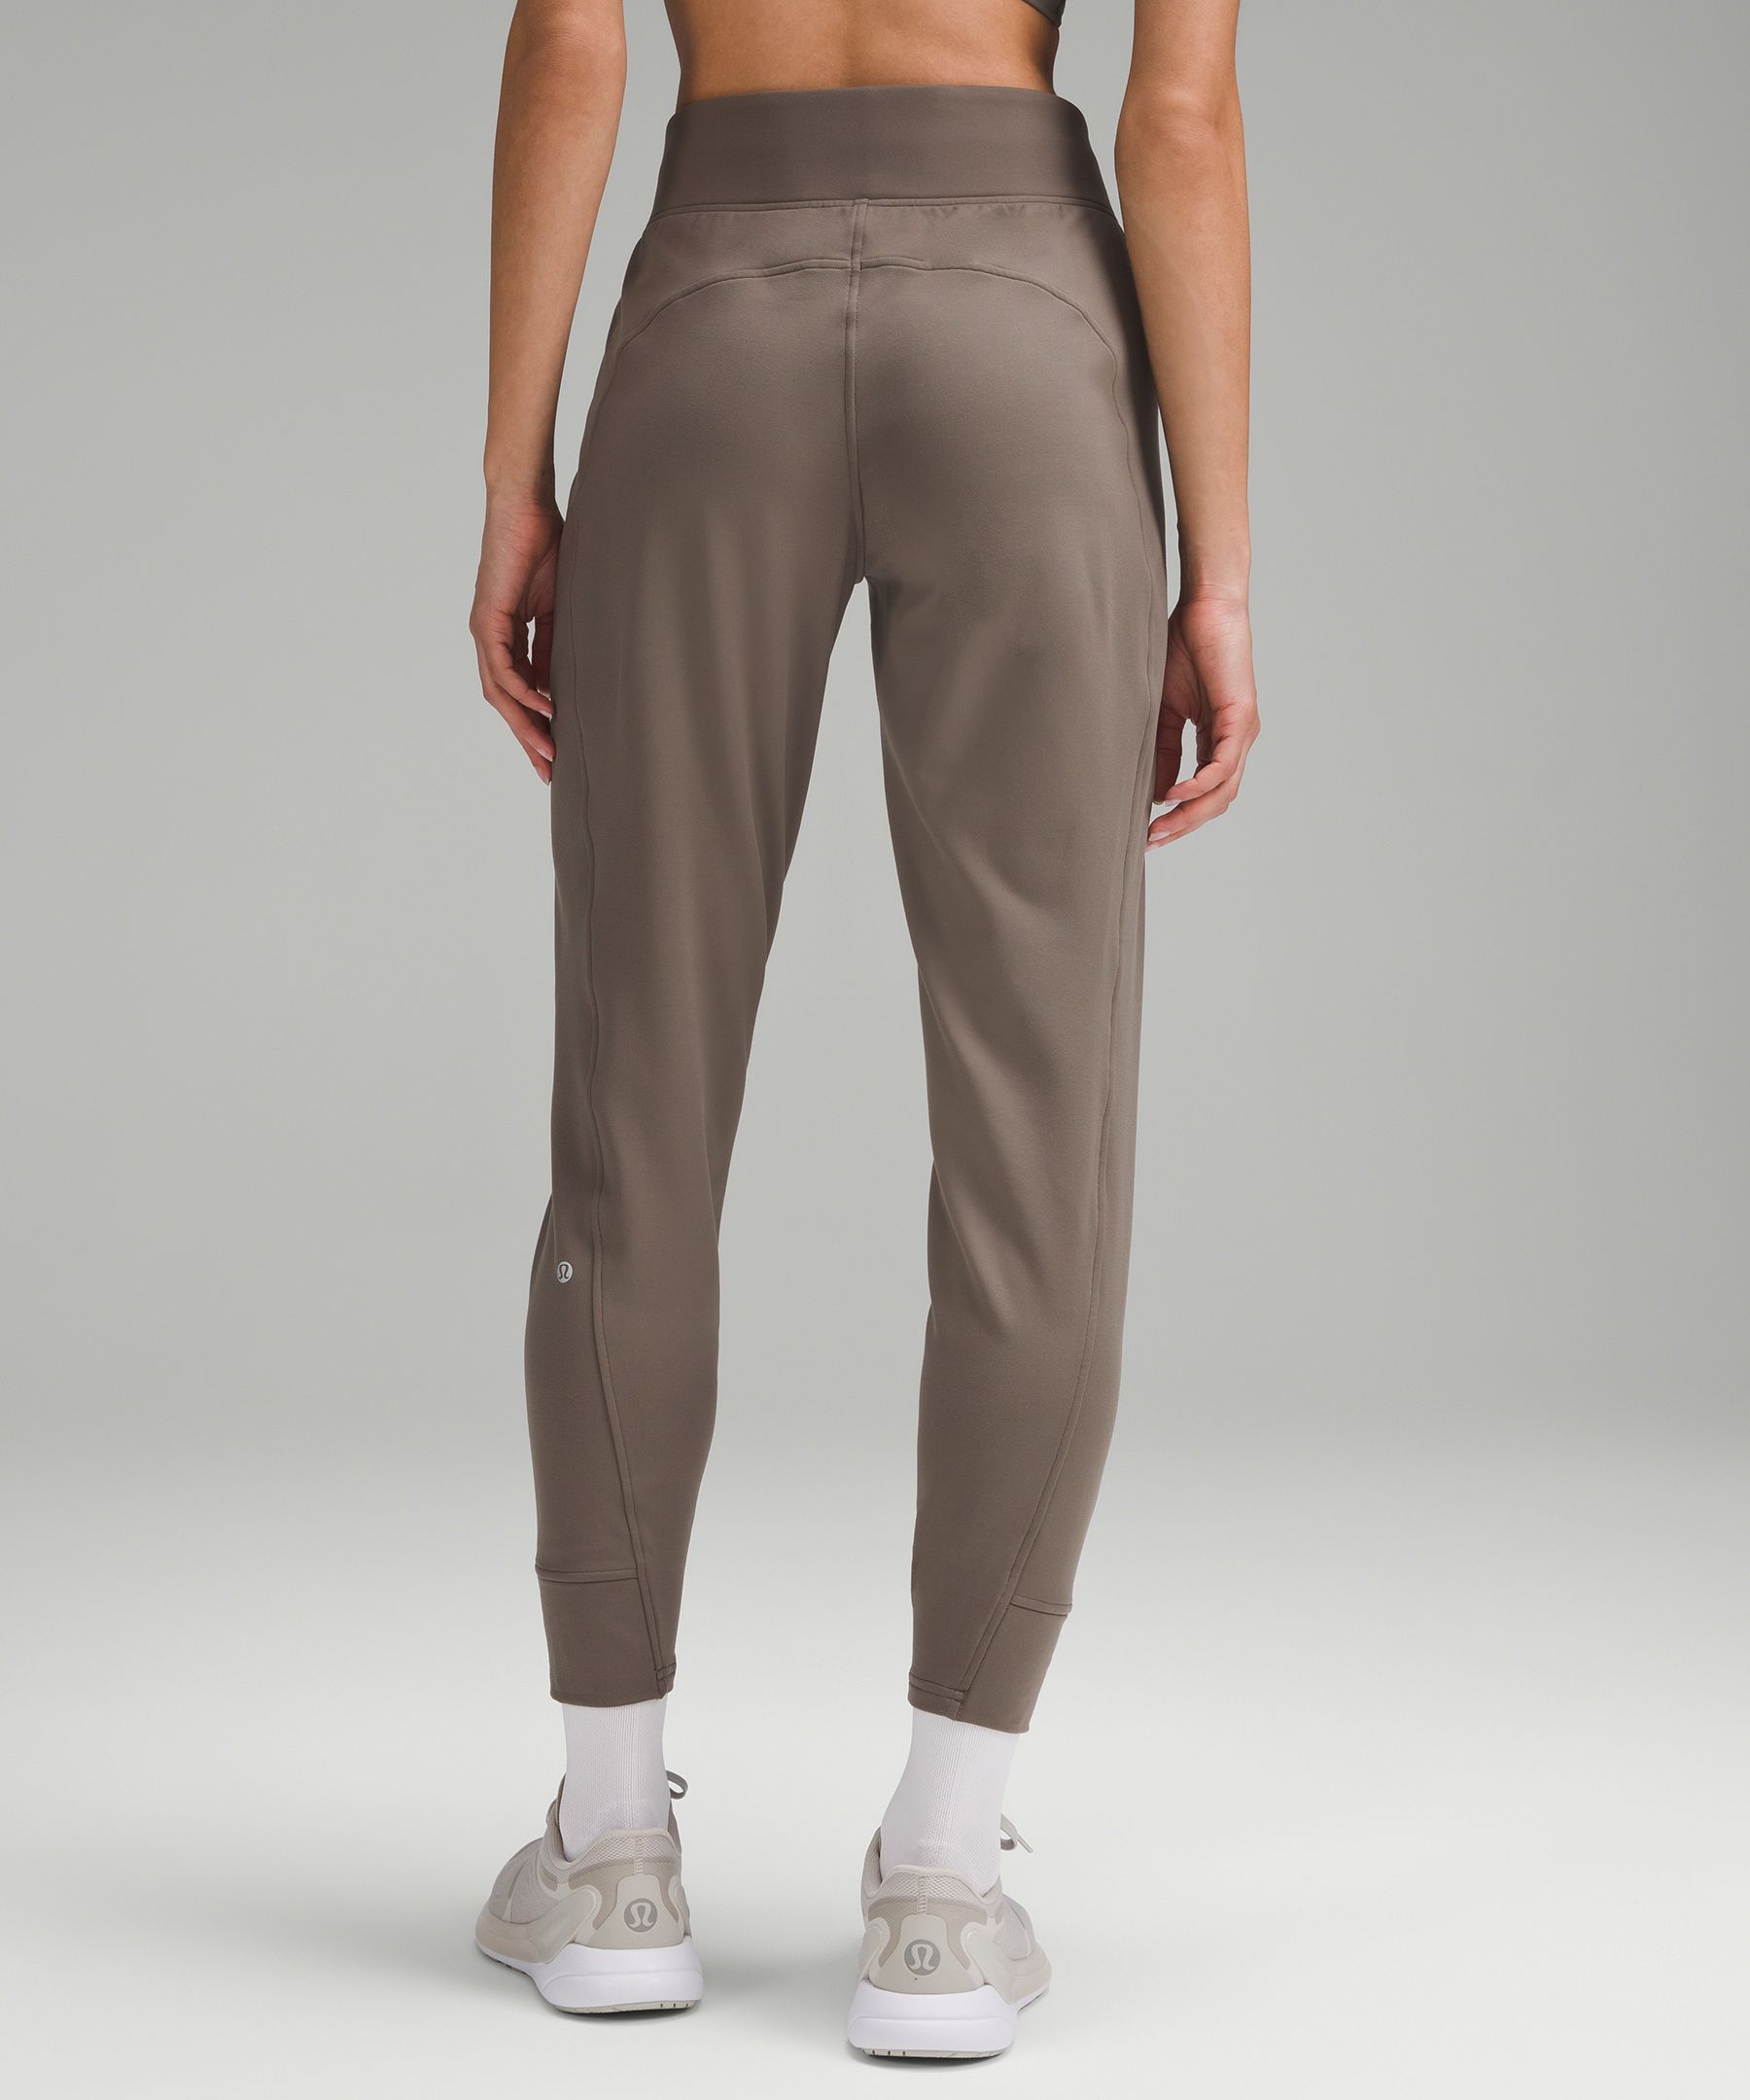 Omg finally got my Ready To Rulu jogger CINCH in size 4 I LOVE them!  Already have like 3 RTR joggers but these are soo cute : r/lululemon